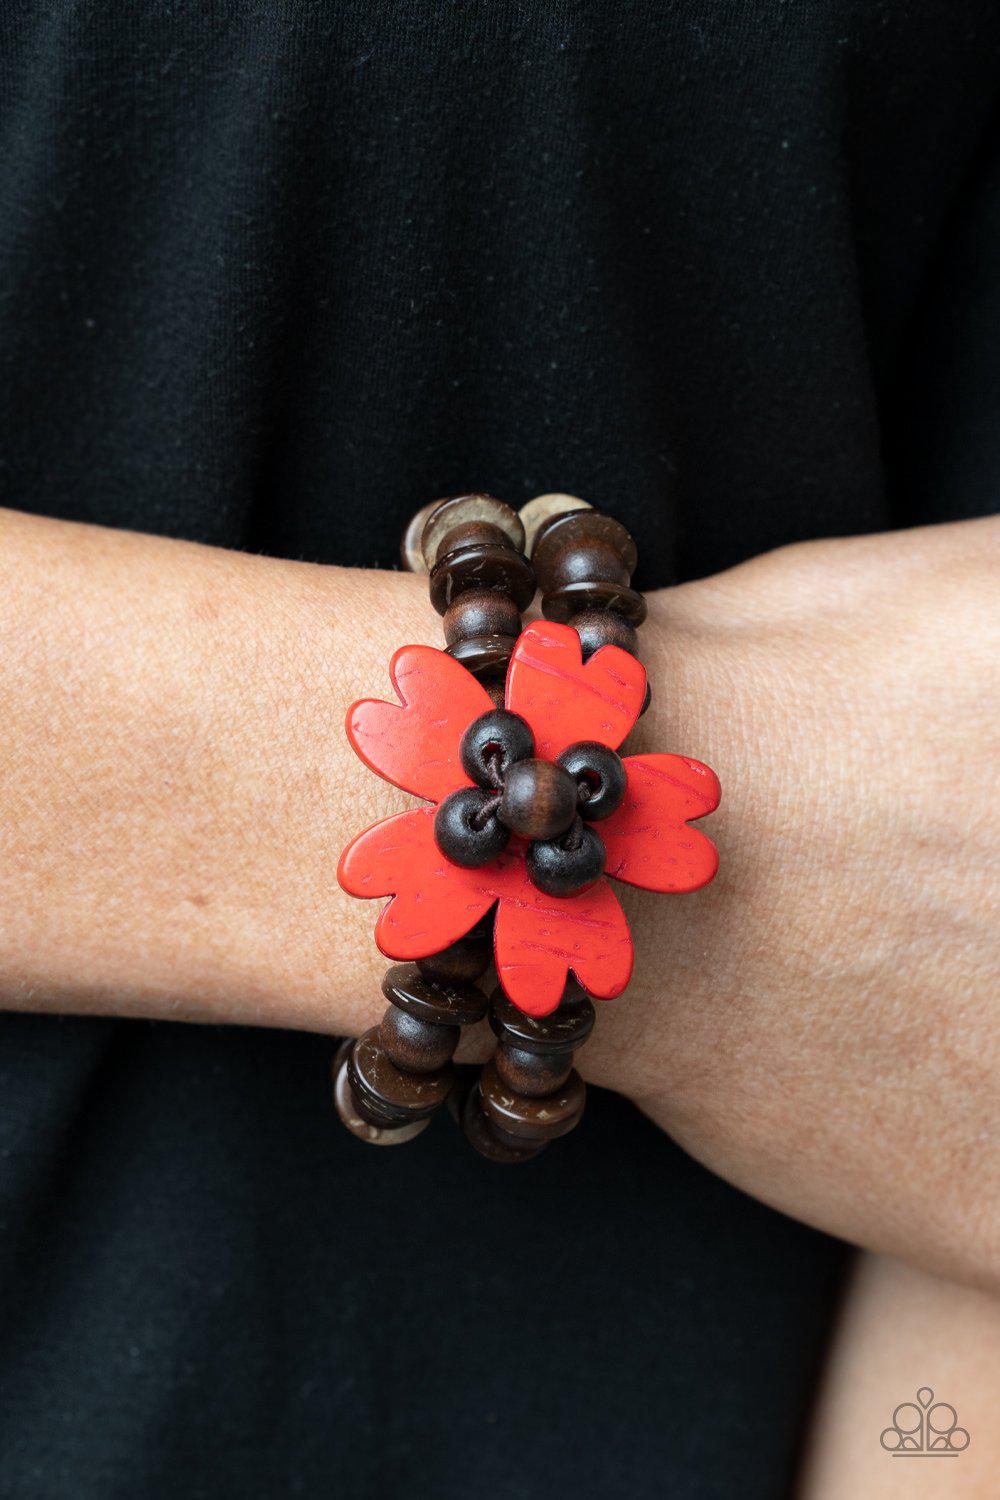 Tropical Flavor Red Wood Flower Bracelet - Paparazzi Accessories- lightbox - CarasShop.com - $5 Jewelry by Cara Jewels